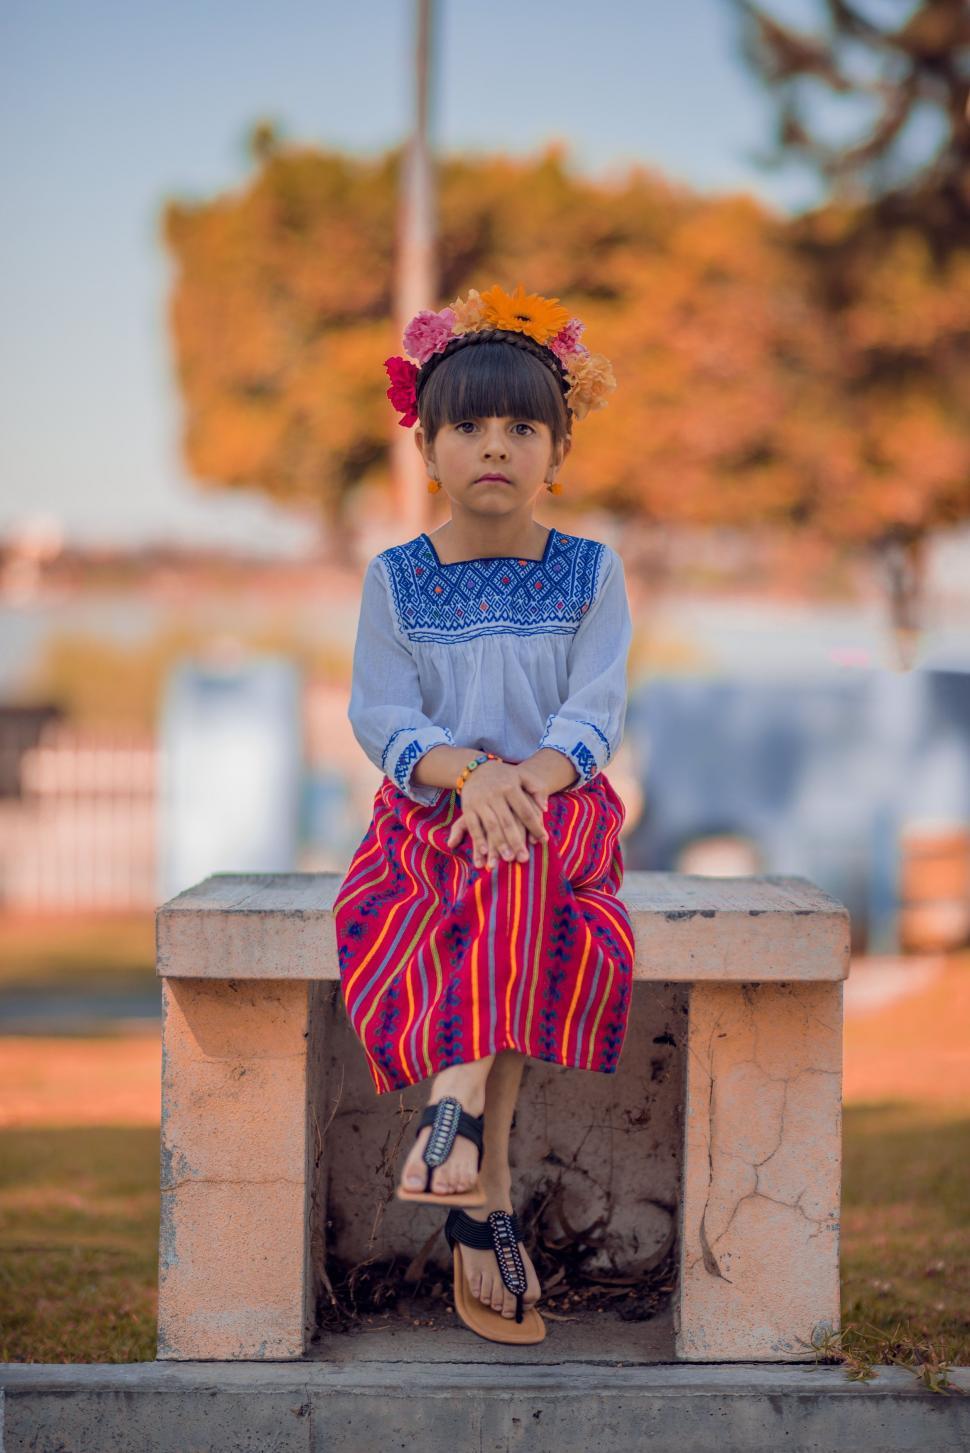 Free Image of Little Girl Sitting on Top of Cement Bench 